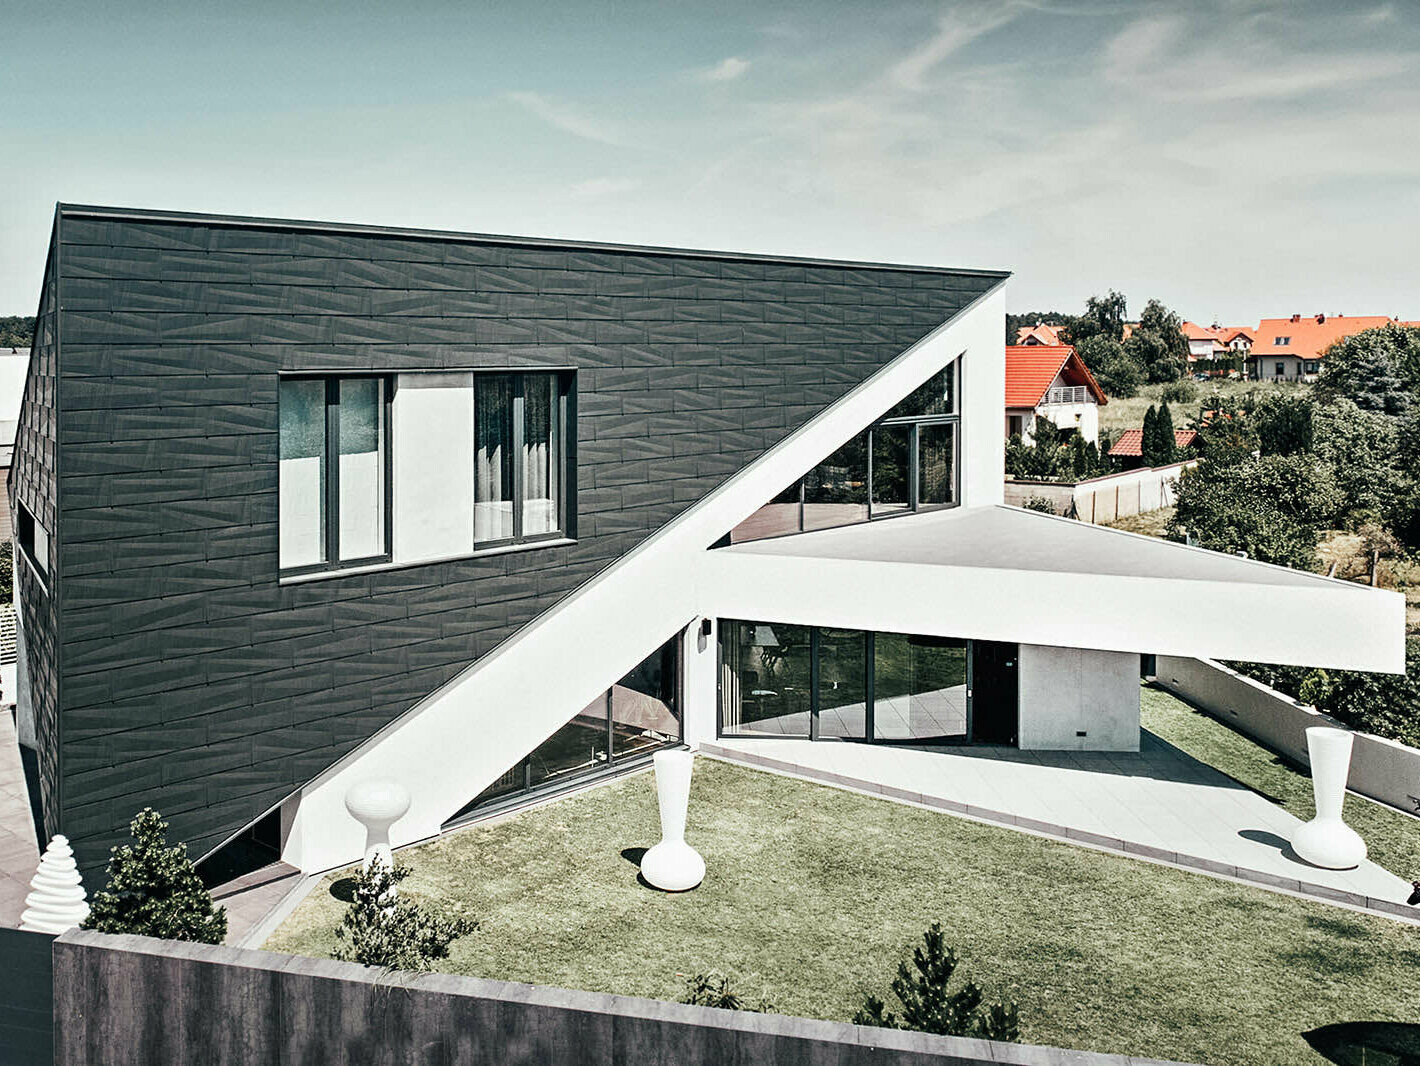 Lateral view of the triangle house in Poland. It is covered in PREFA Siding.X façade panels, which matches the white contrast of the rest of the house.